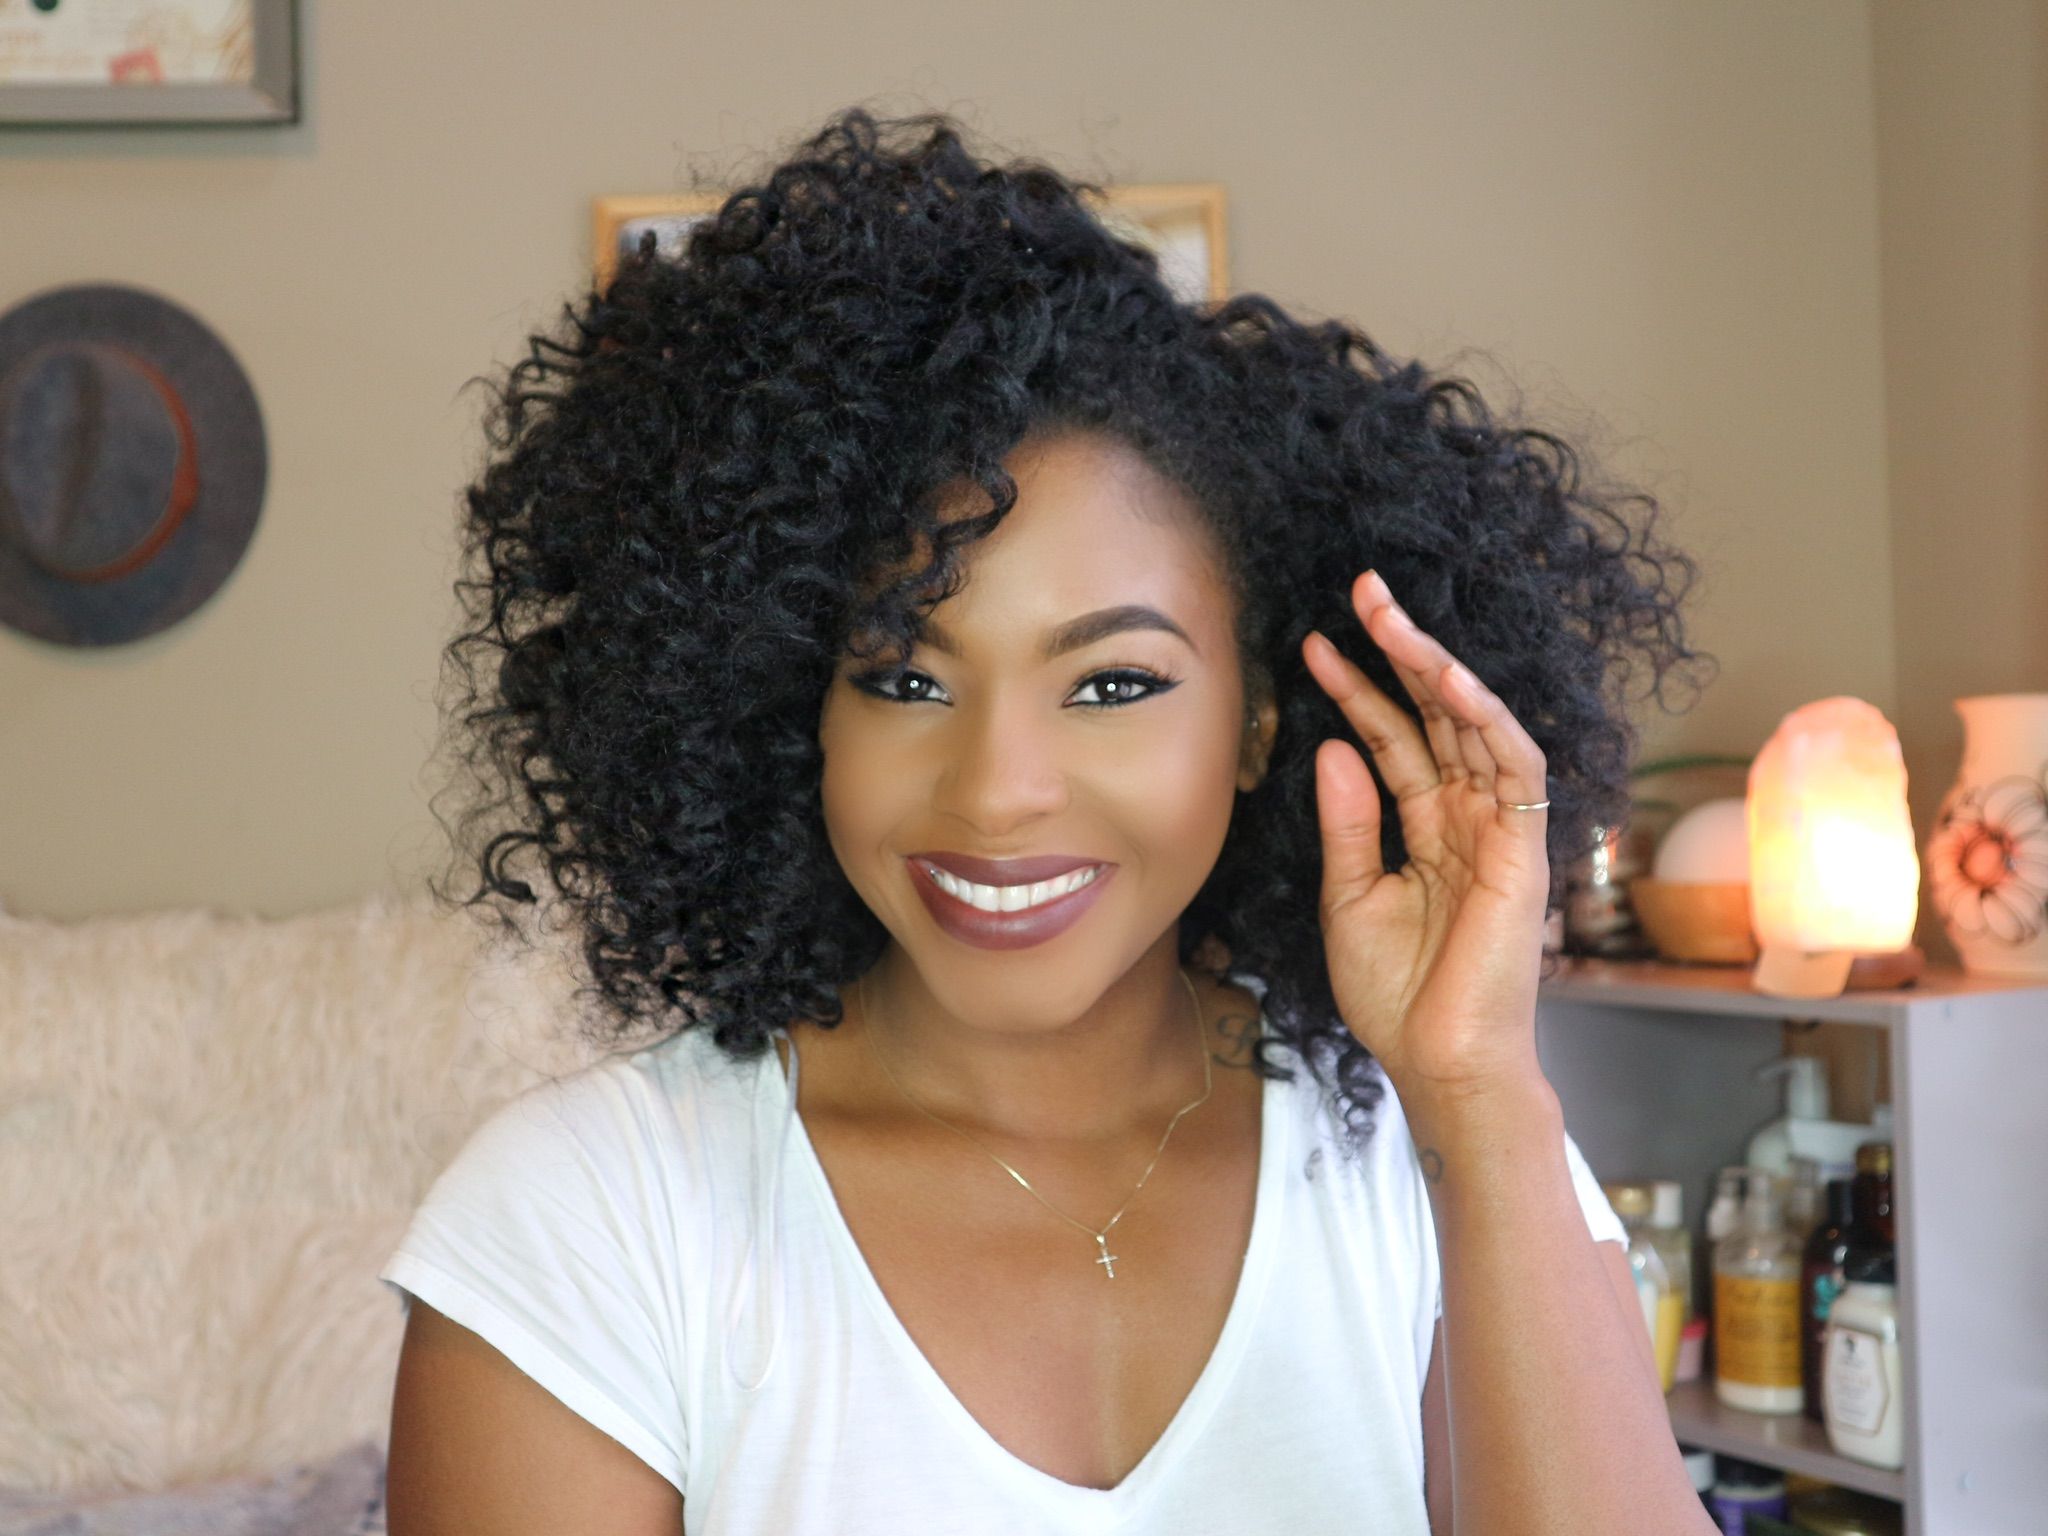 12 best crochet hairstyles 2019 - pictures of curly crochet hair